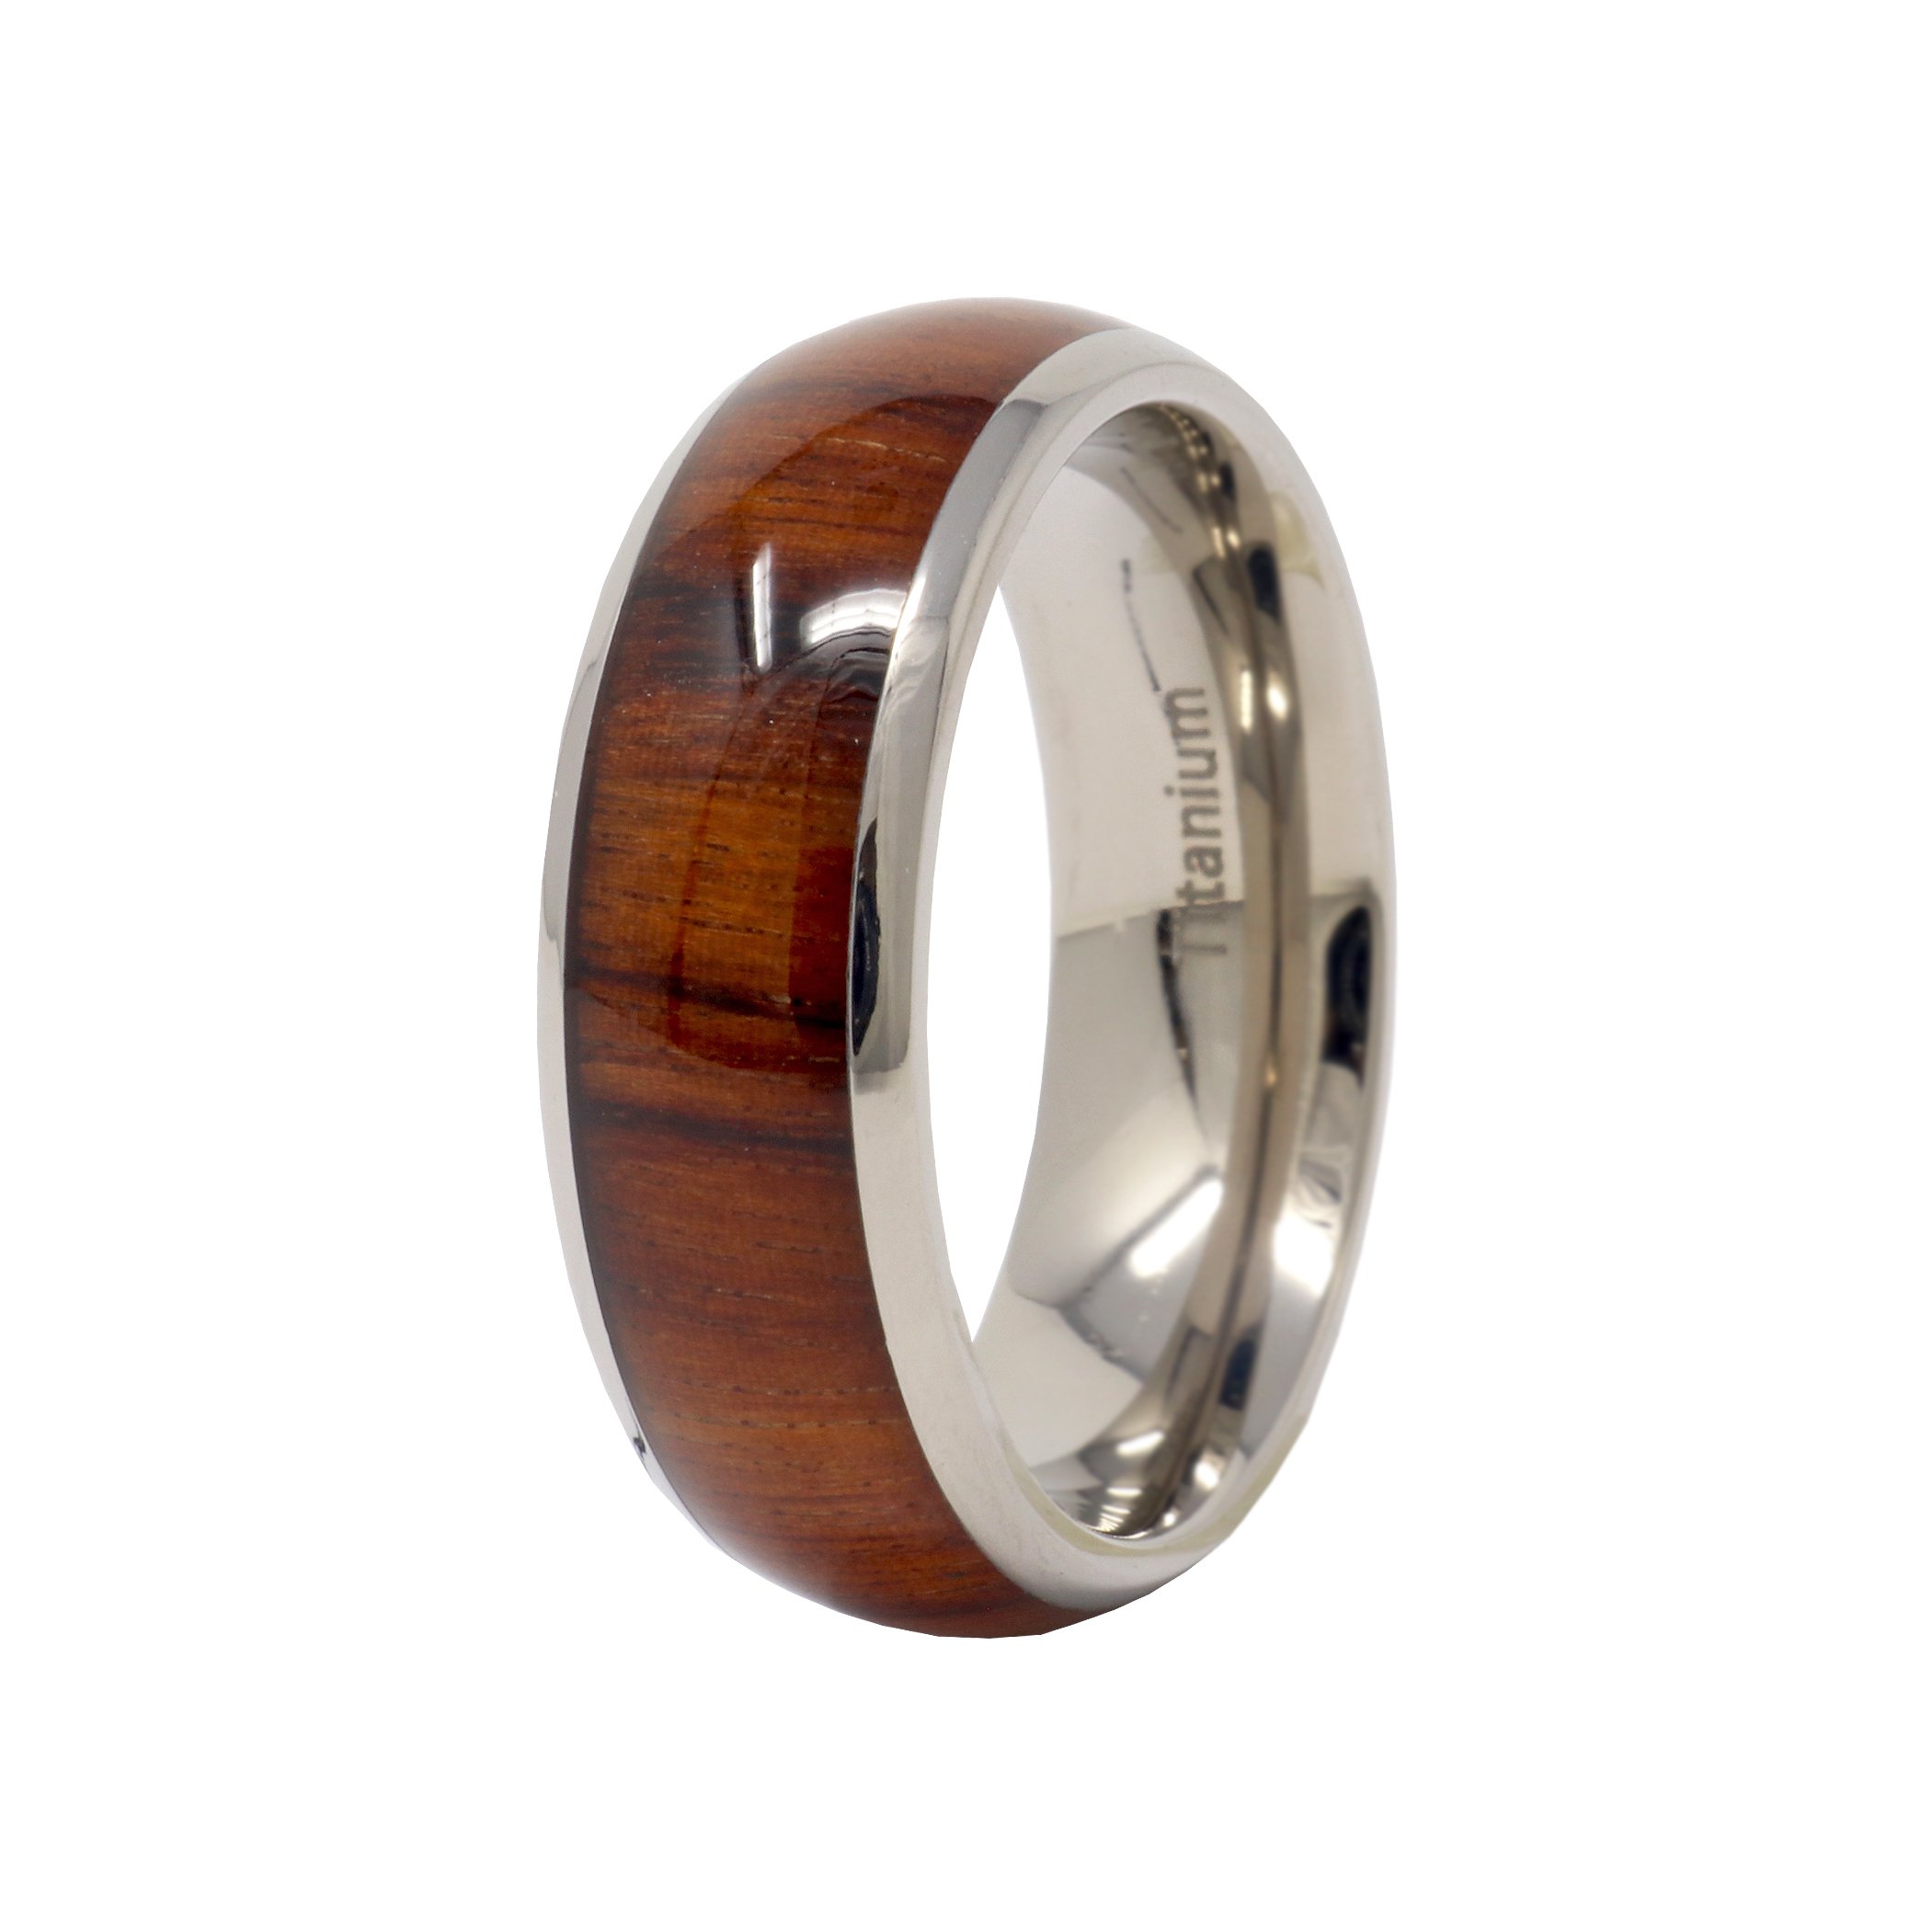 Titanium Ring Size 10.5 - 8mm Domed Rosewood Inlay